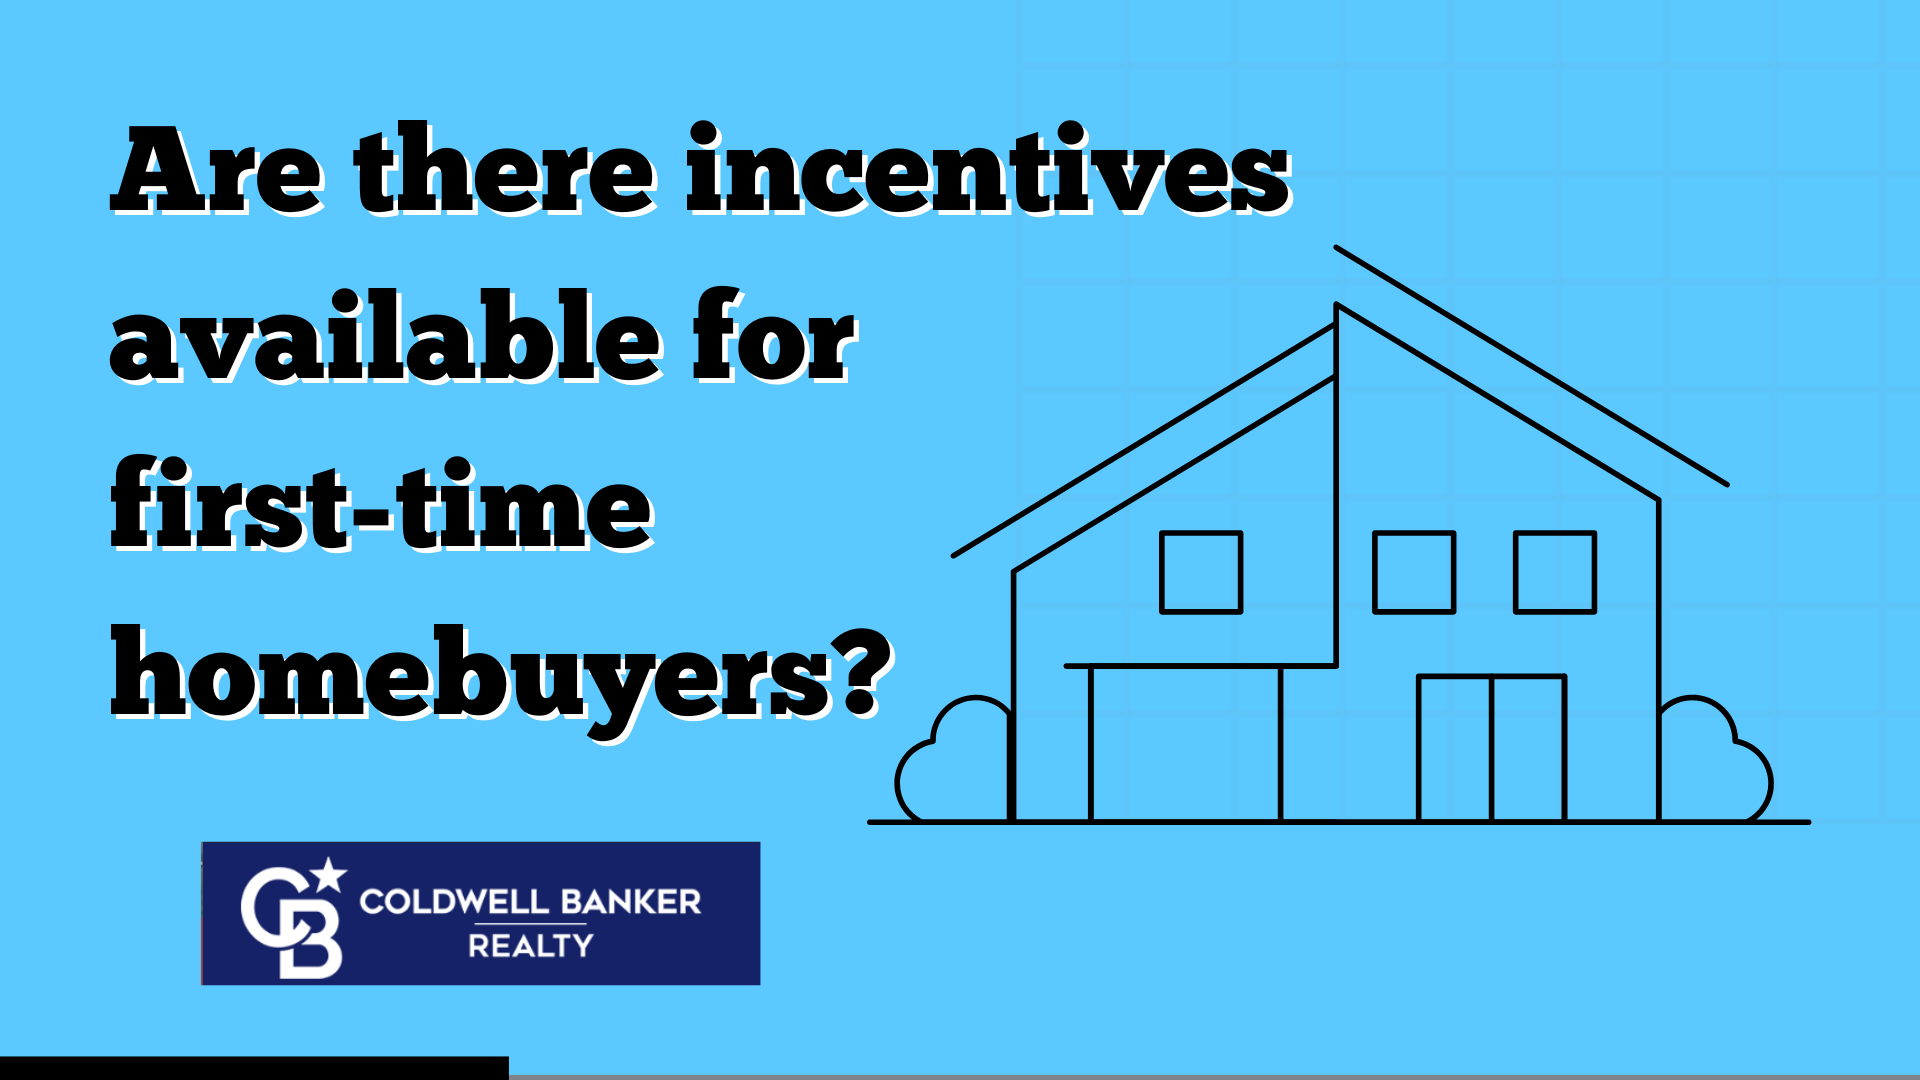 Are there incentives or discounts available for first-time homebuyers?